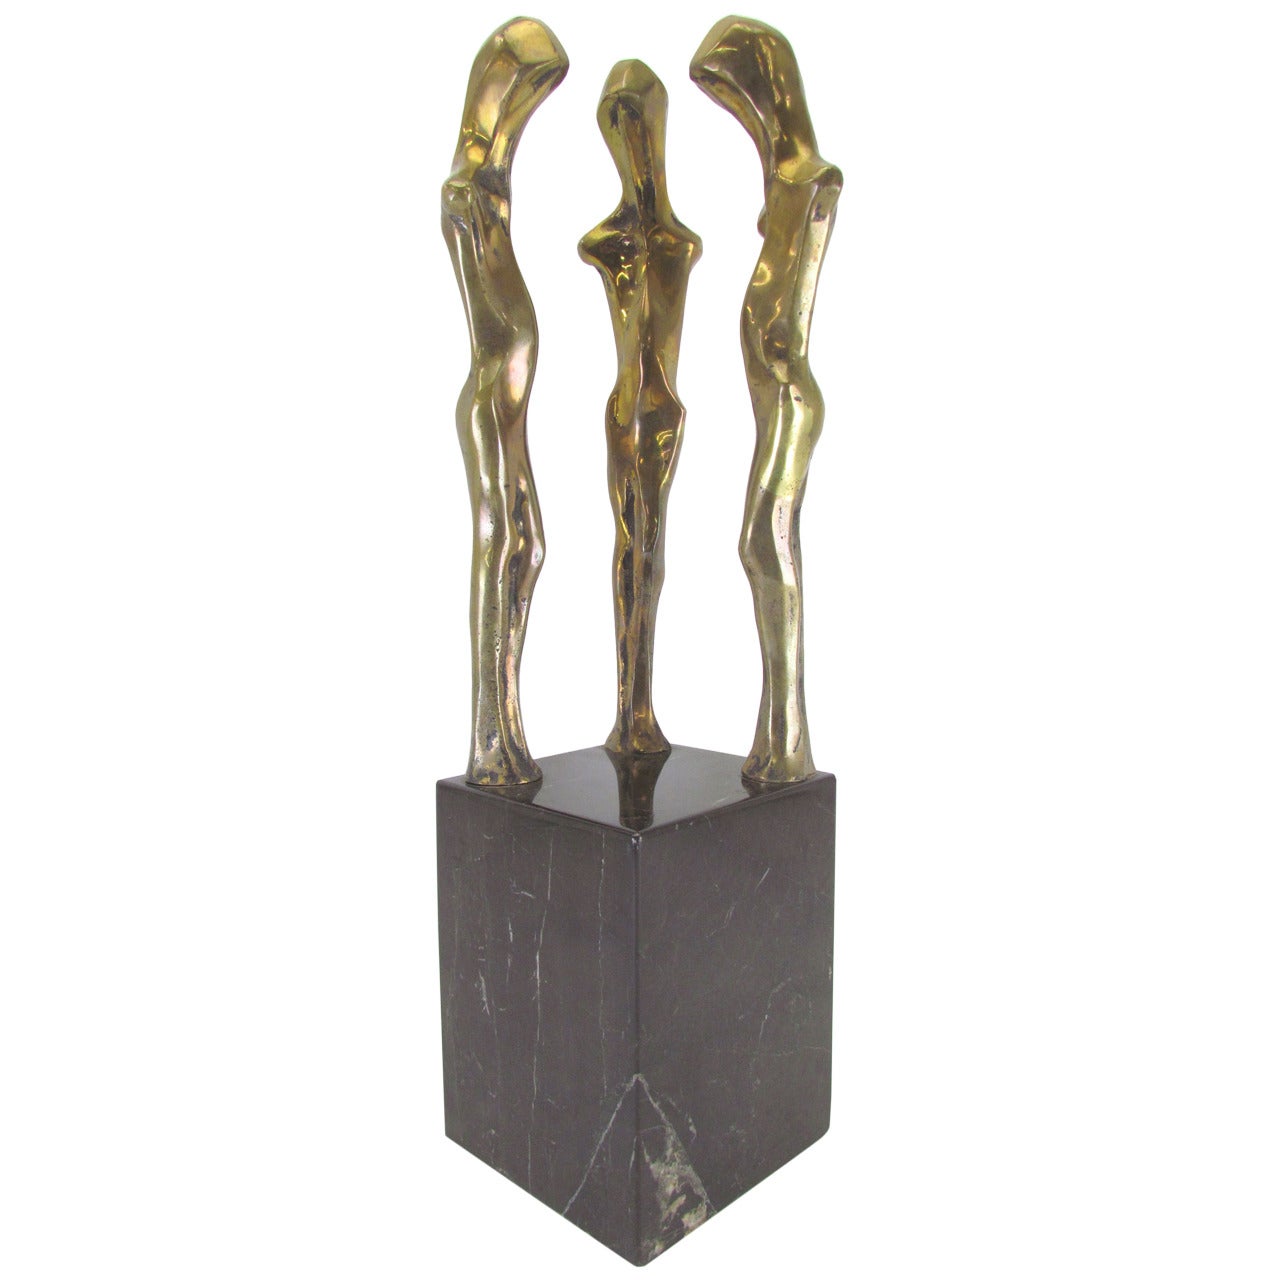 Abstract Figural Modernist Sculpture in Bronze and Marble, Signed Davidson